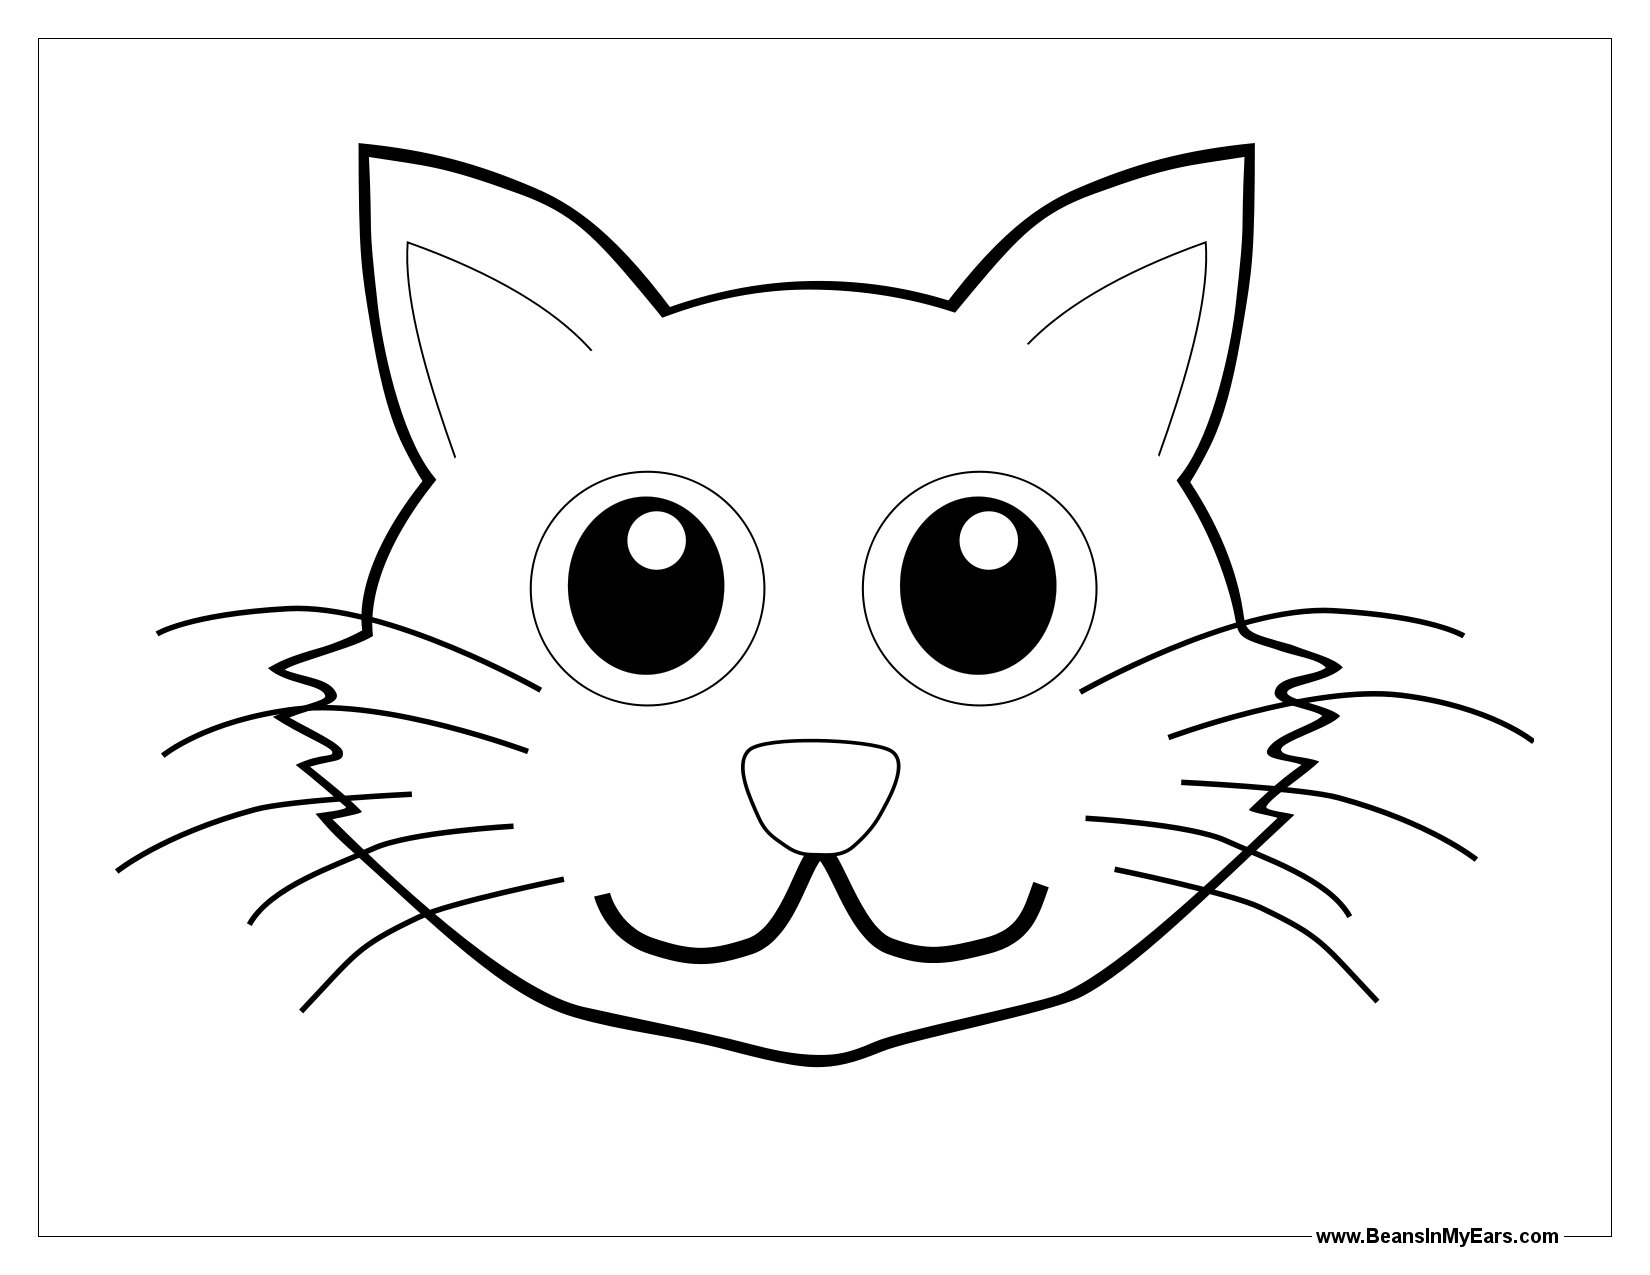 Elephant Face Coloring Pages at GetColorings.com | Free printable